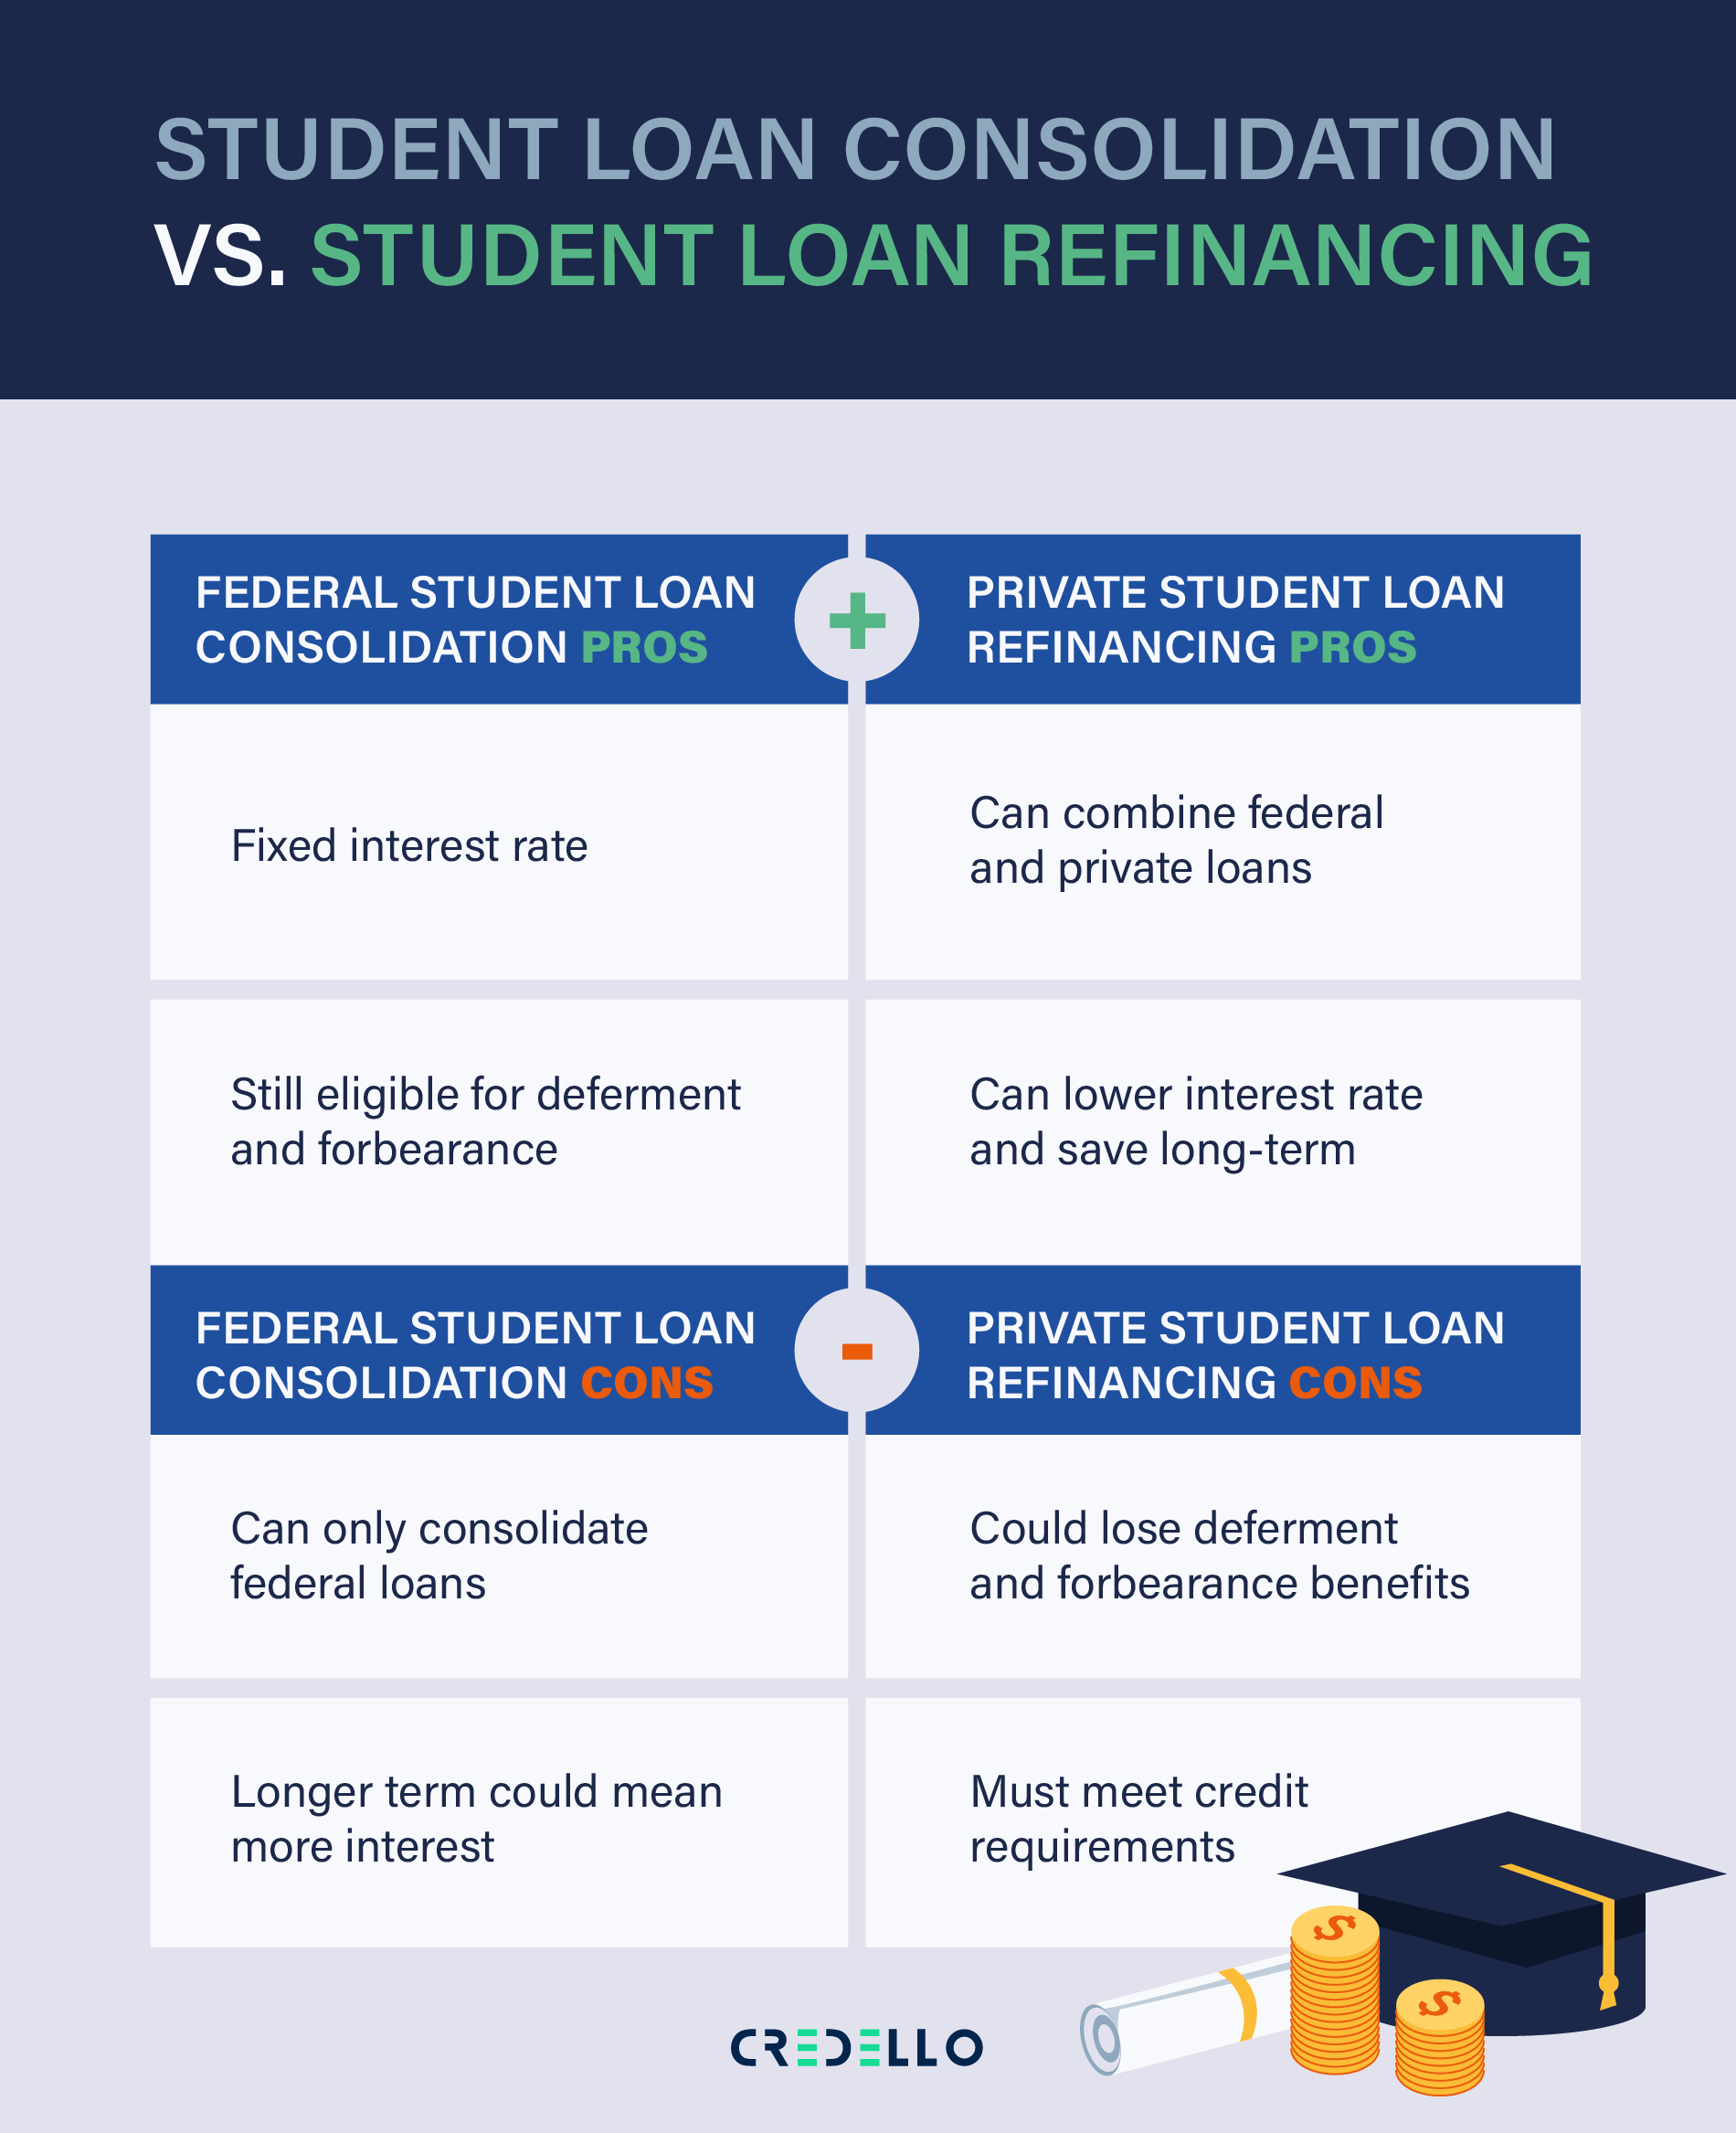 Learn the difference between Student loan consolidation and student loan refinancing